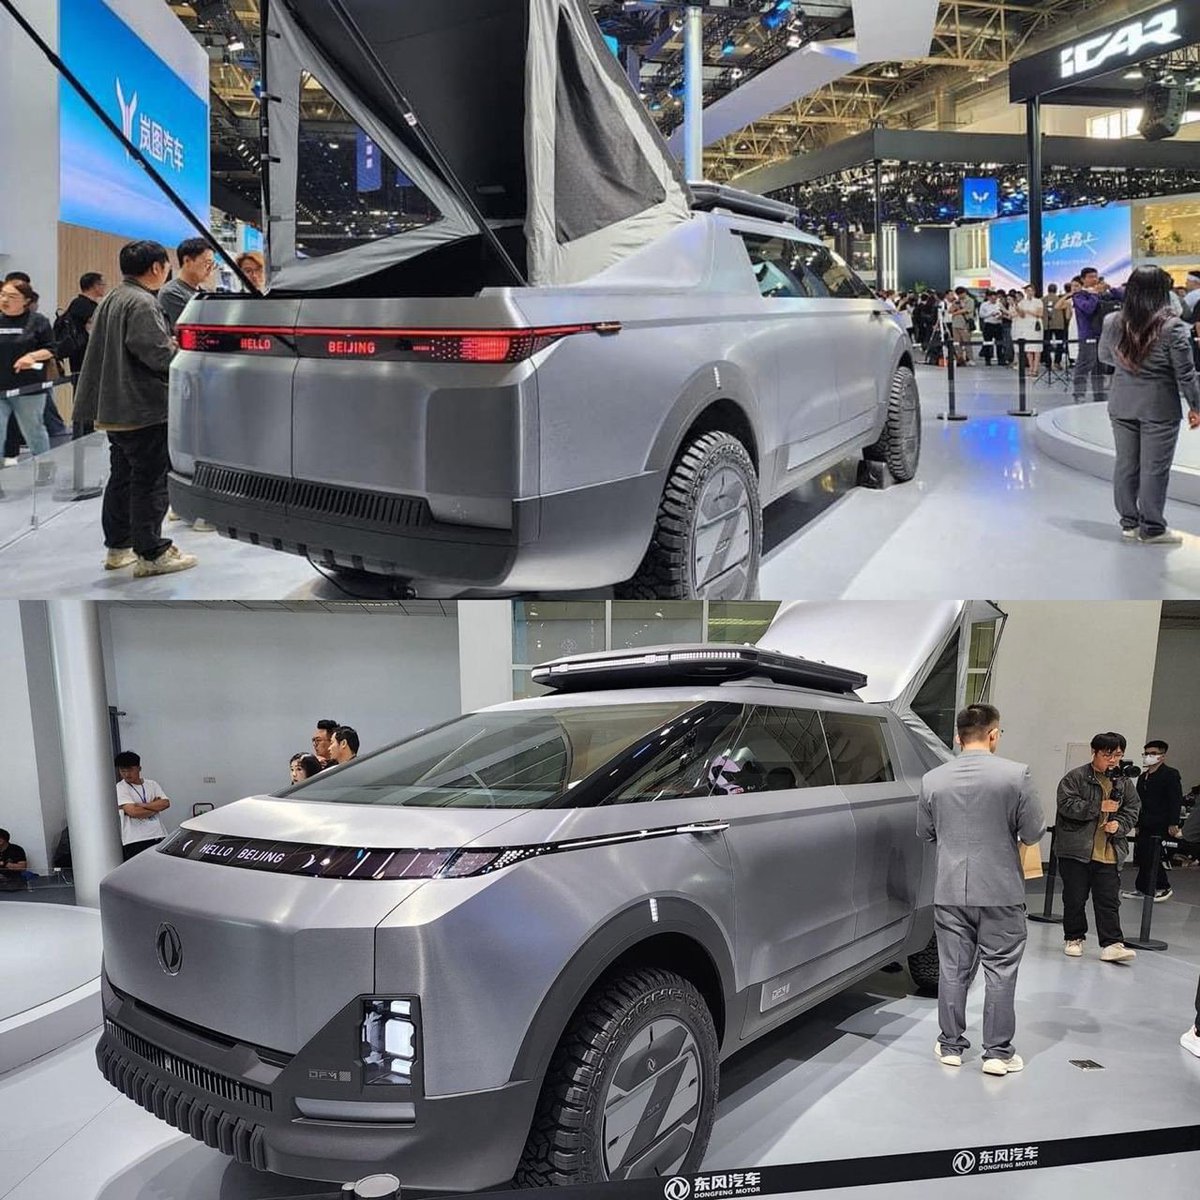 Just unveiled today at the Beijing auto show by Dongfeng Motors. Wouldn't it be hilarious if they sell more of their knockoffs than Tesla does of the real thing? 🤣